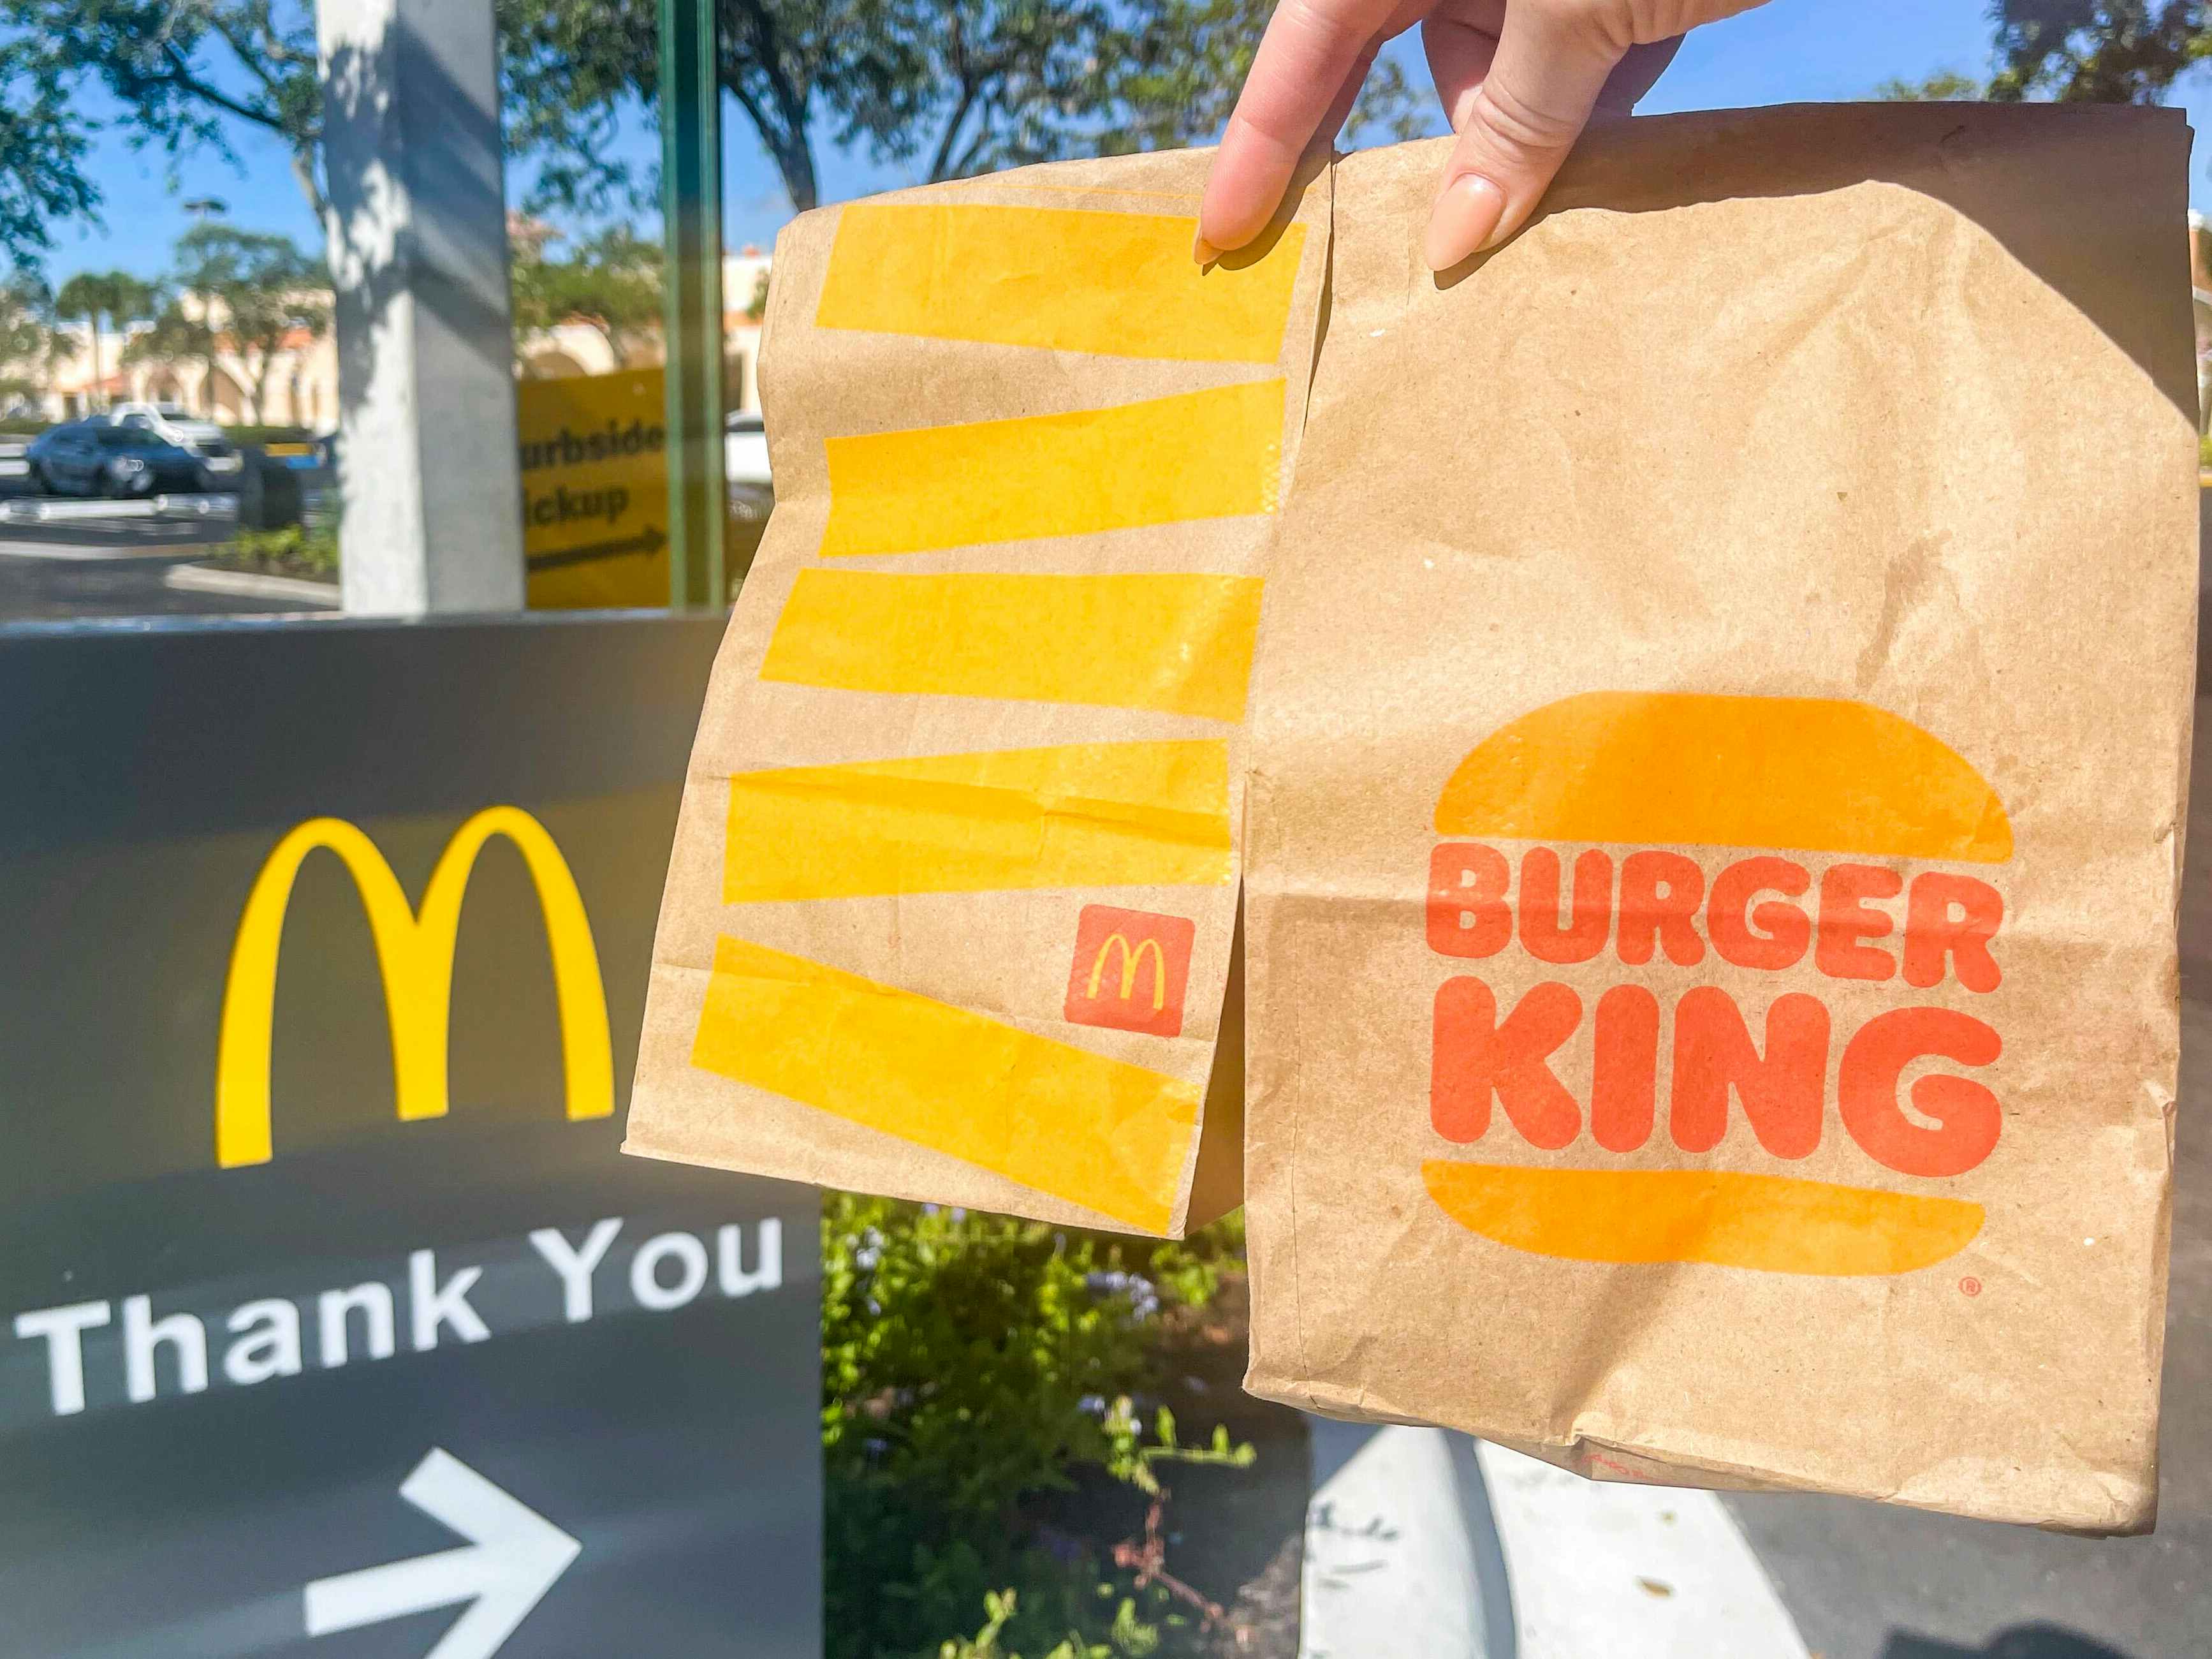 A person holding a McDonald's and Burger King to-go bag in one hand next to a sign that reads "thank you" with a McDonald's golden arch logo.